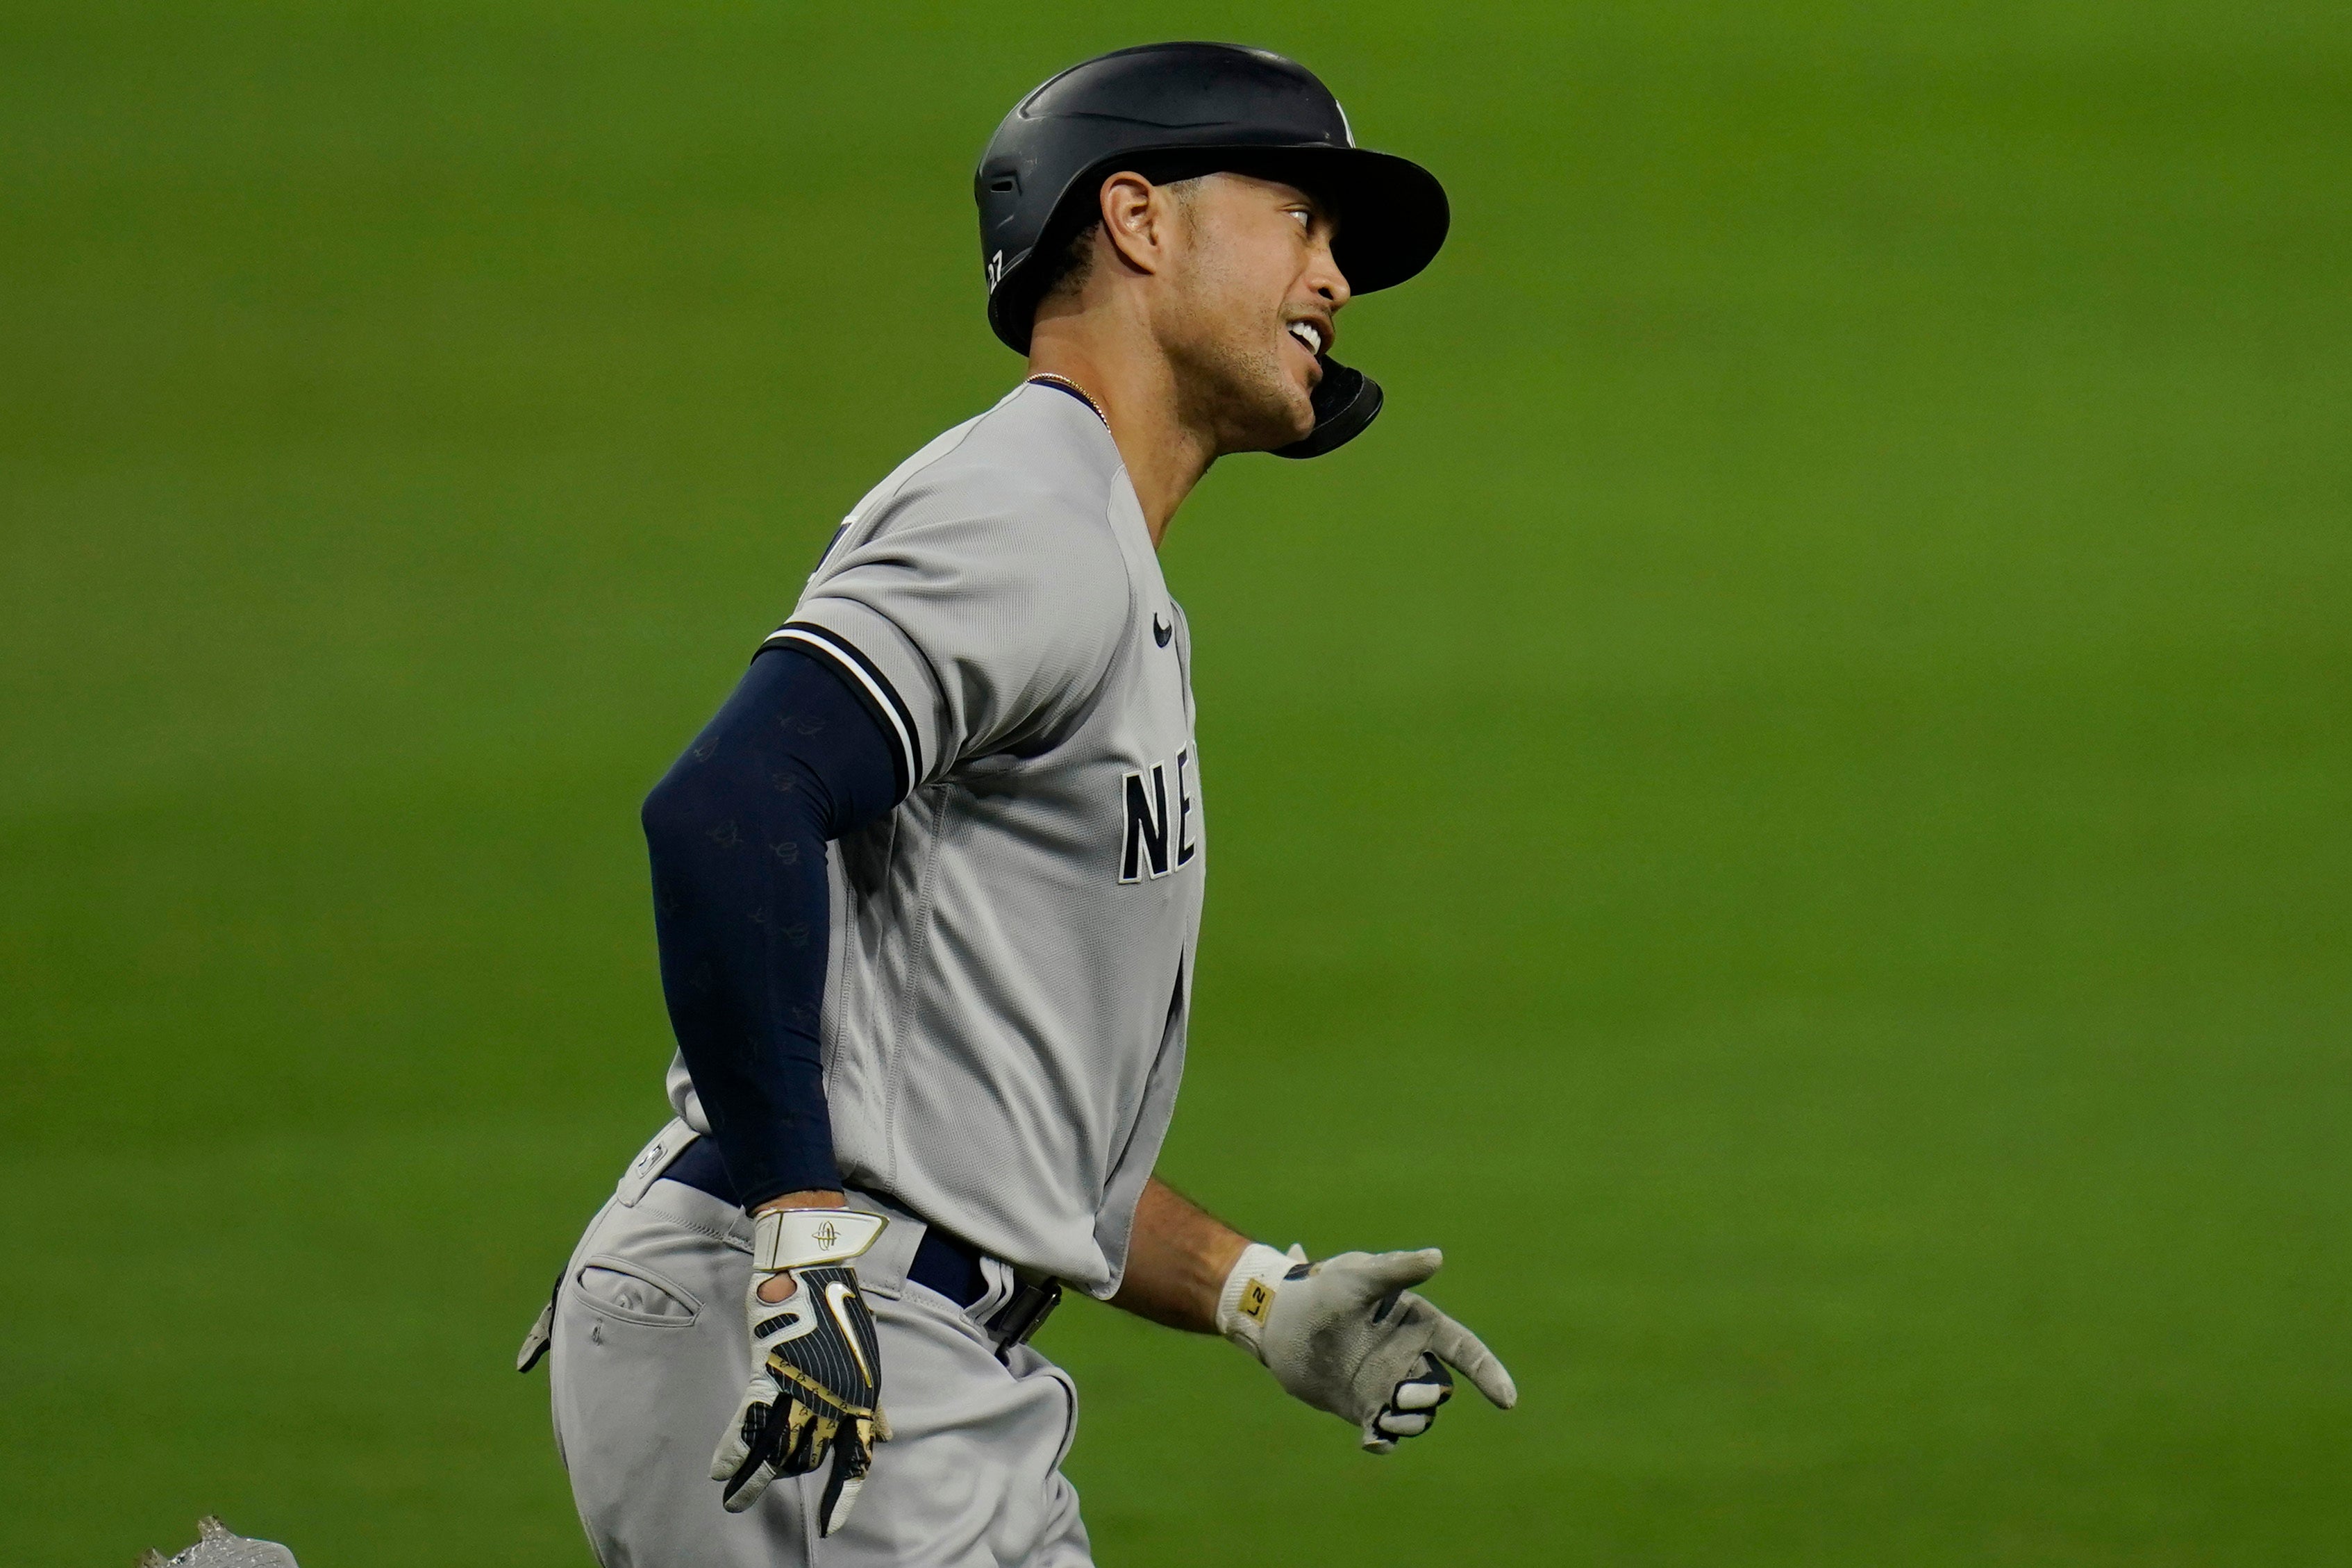 The Yankees have to keep playing Giancarlo Stanton in the outfield